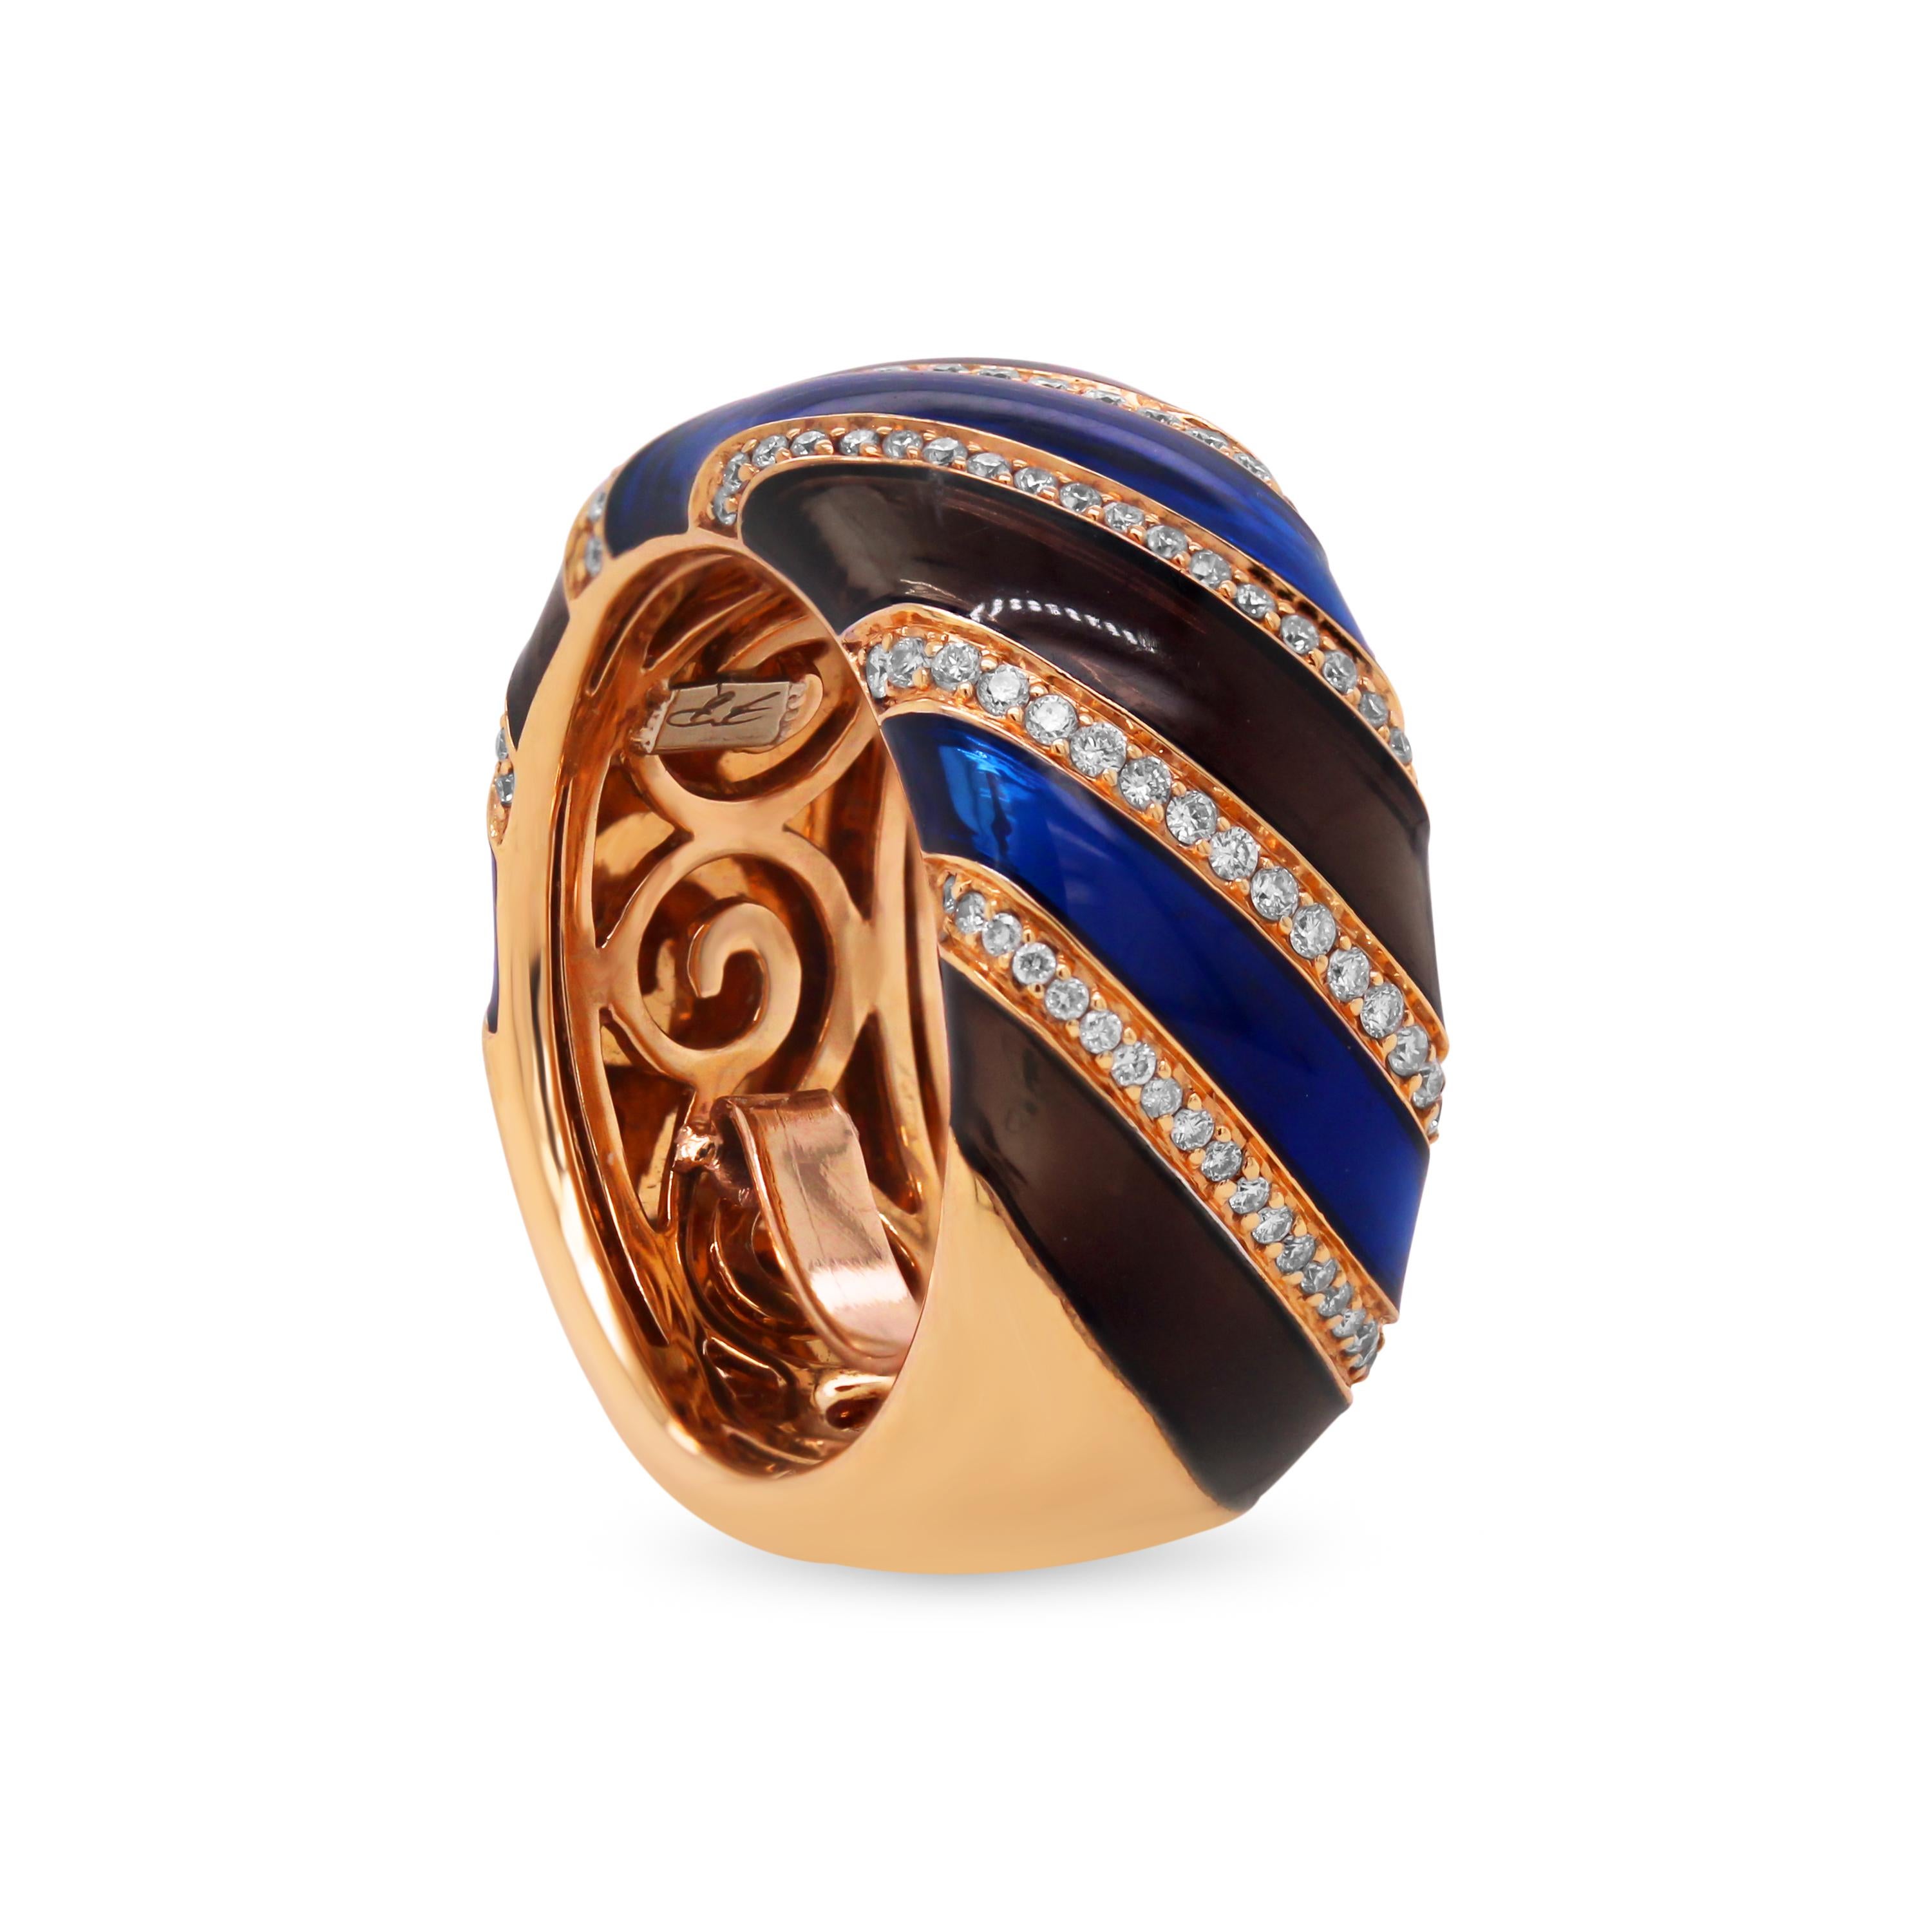 18 Karat Rose Gold Diamond Cobalt Navy Blue and Brown Enamel Wide Band Ring

Apprx. 0.50 carat G color, VS clarity diamonds total weight

Band has a ring guard that can be removed if needed.

Size 4.50, sizable by request

10mm width.